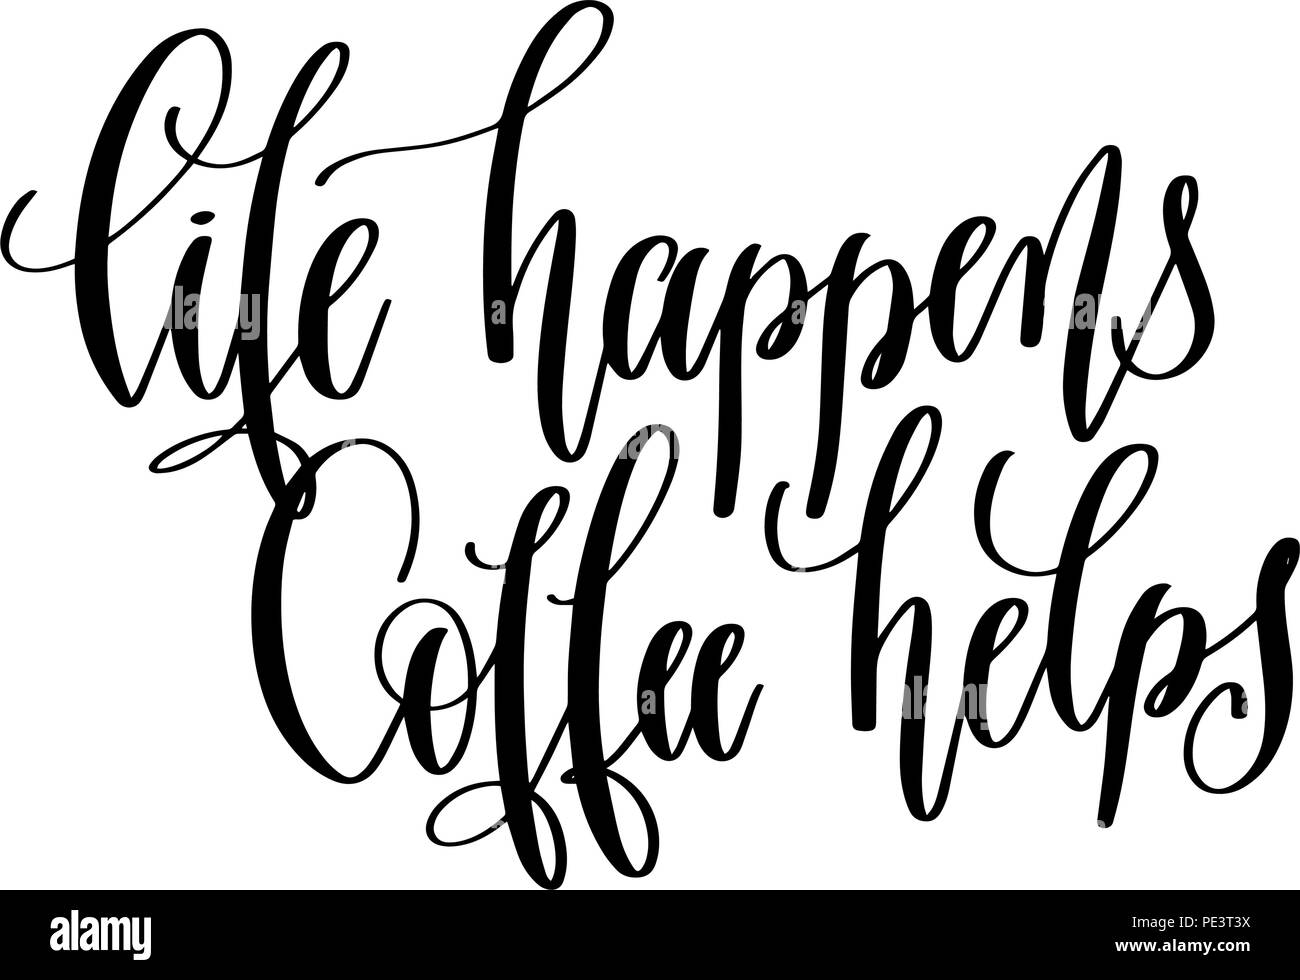 Life Happens. Menu & Art Printable Alamy Coffee sign topics - art Image handwritten for Stock lettering. Bar Vector Poster Helps. and